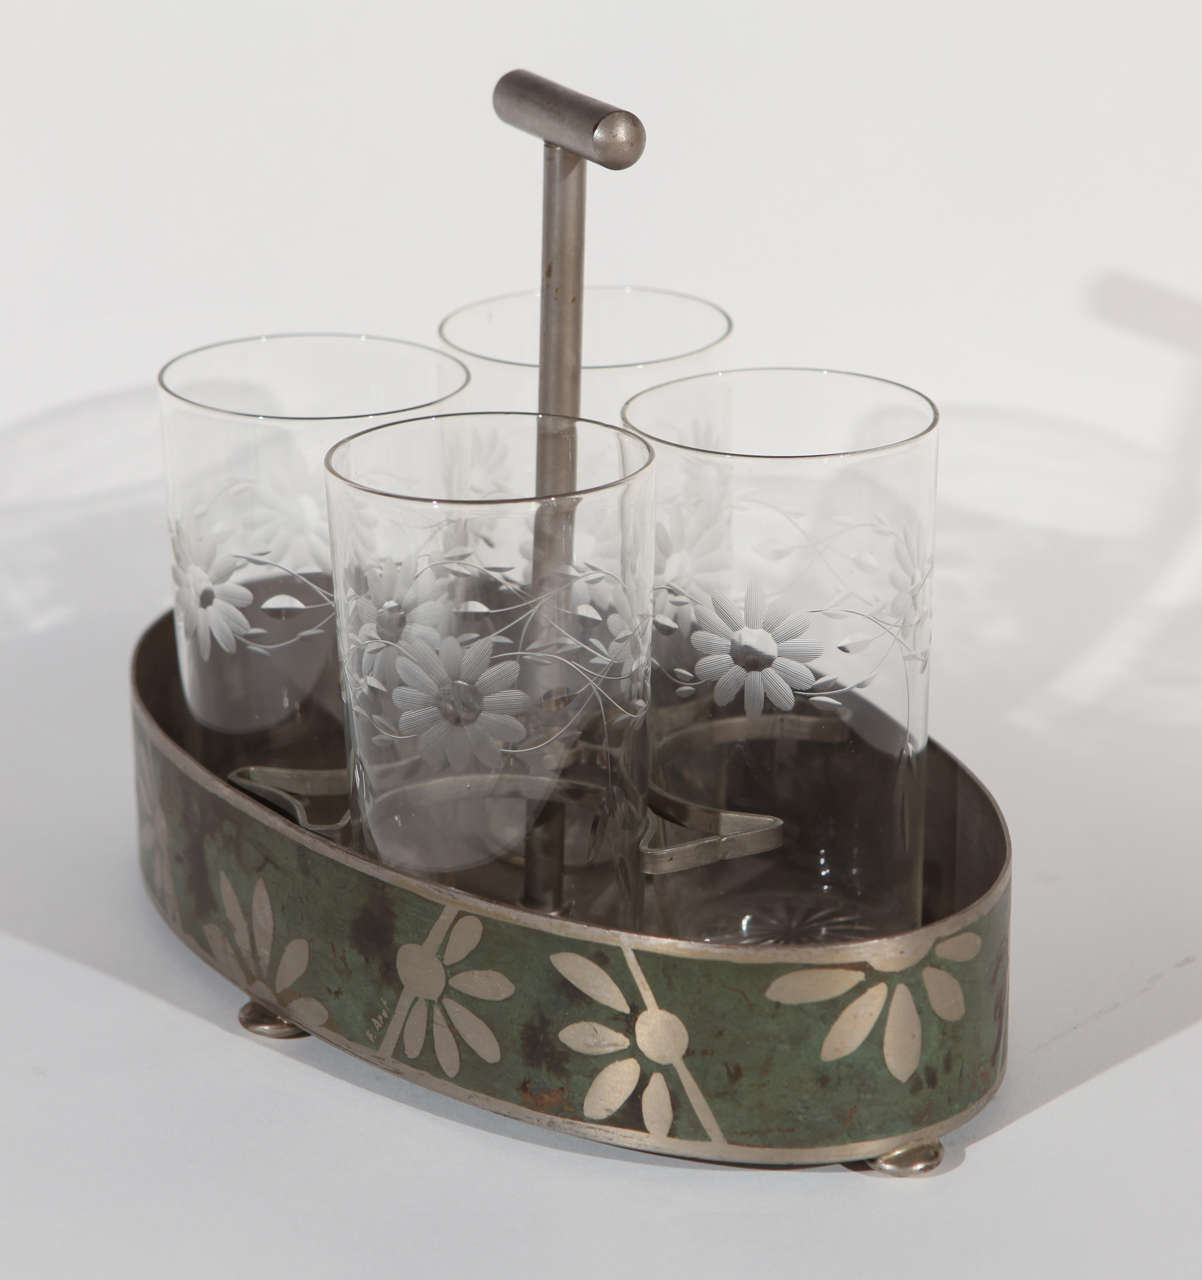 Art Deco Dinanderie aluminum caddy, circa 1920-1930, with four beverage glasses.